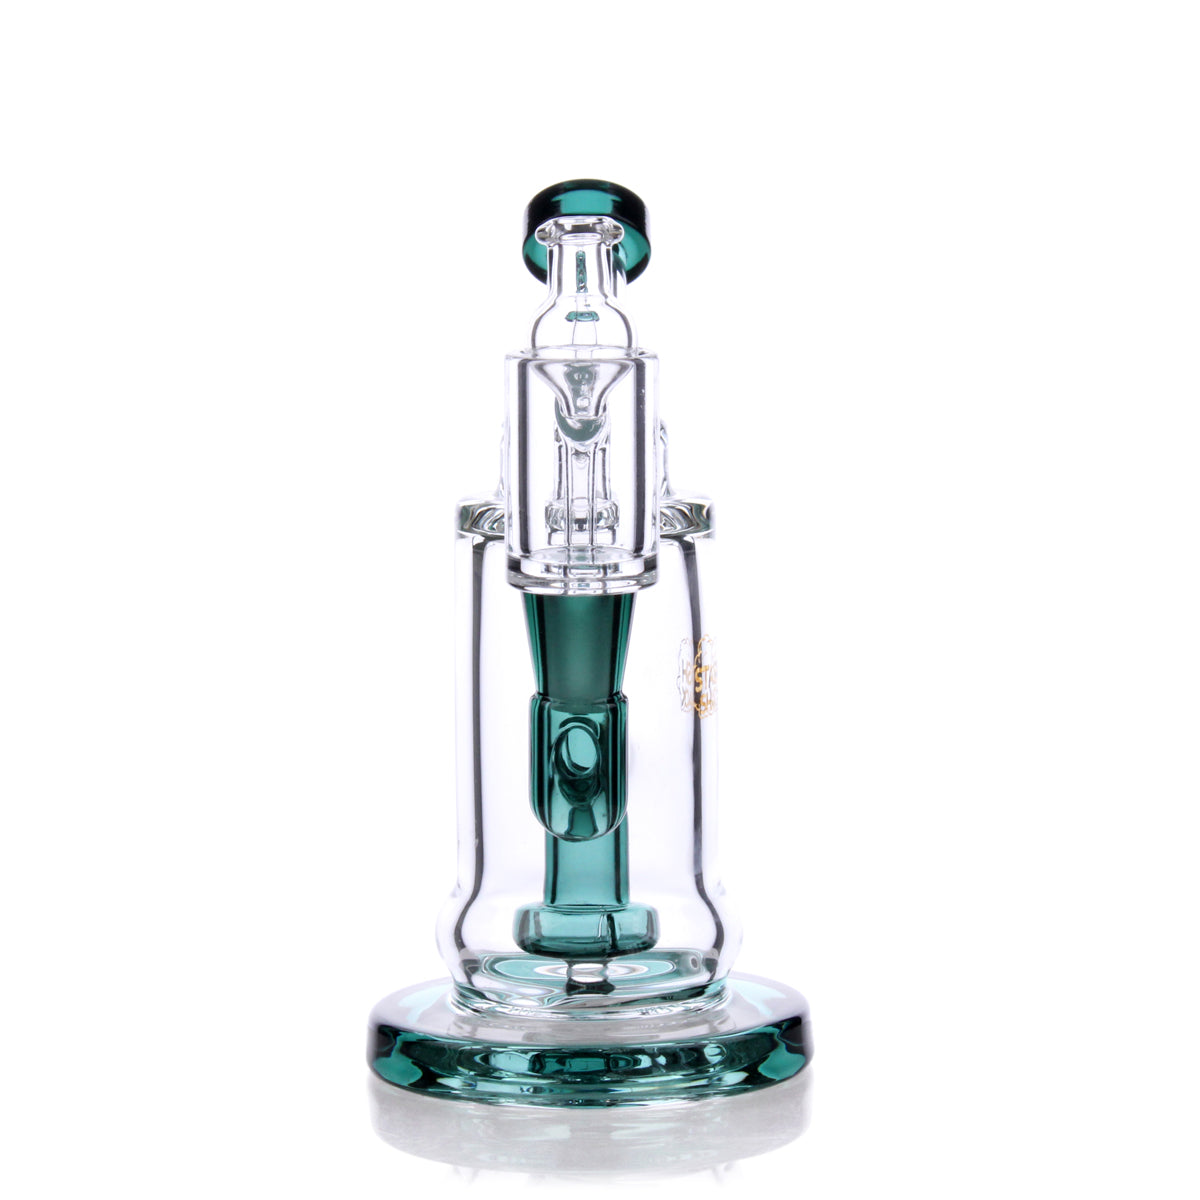 TerpDroid Mini Rig in Green - Compact 5.5" Borosilicate Glass Dab Rig with Showerhead Percolator, Front View